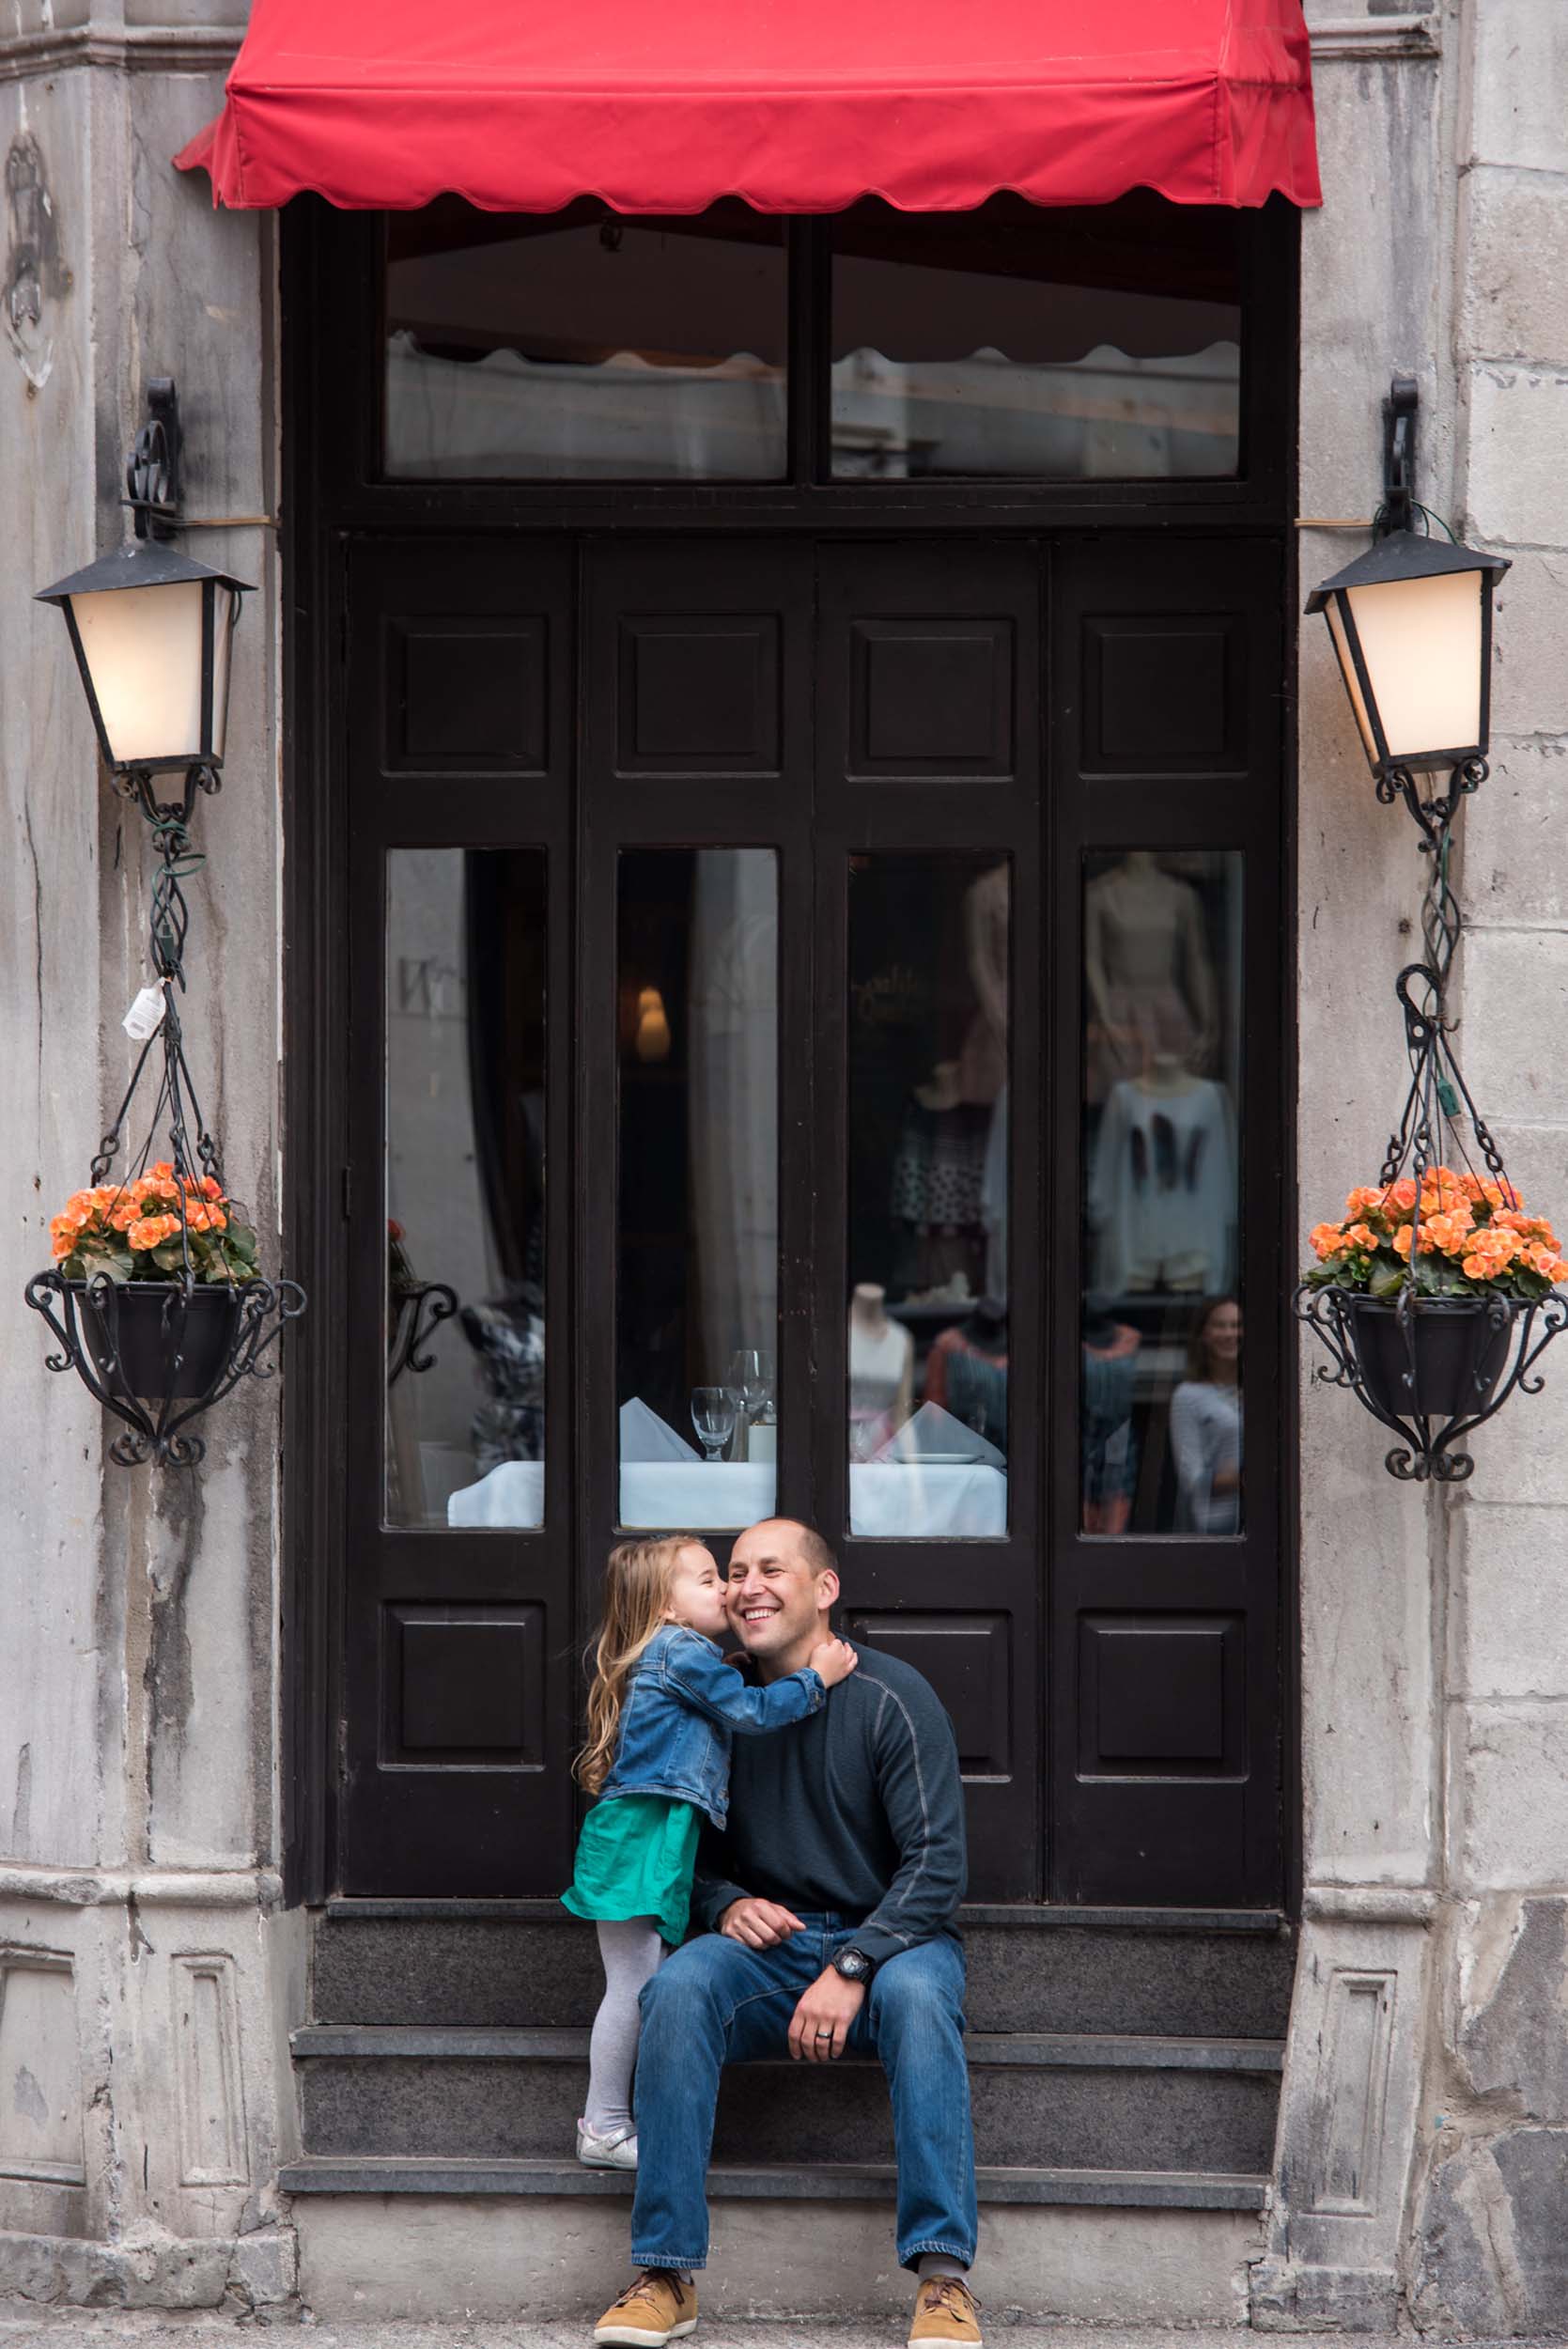   The Tutko family in  Montreal    Flytographer Marie  